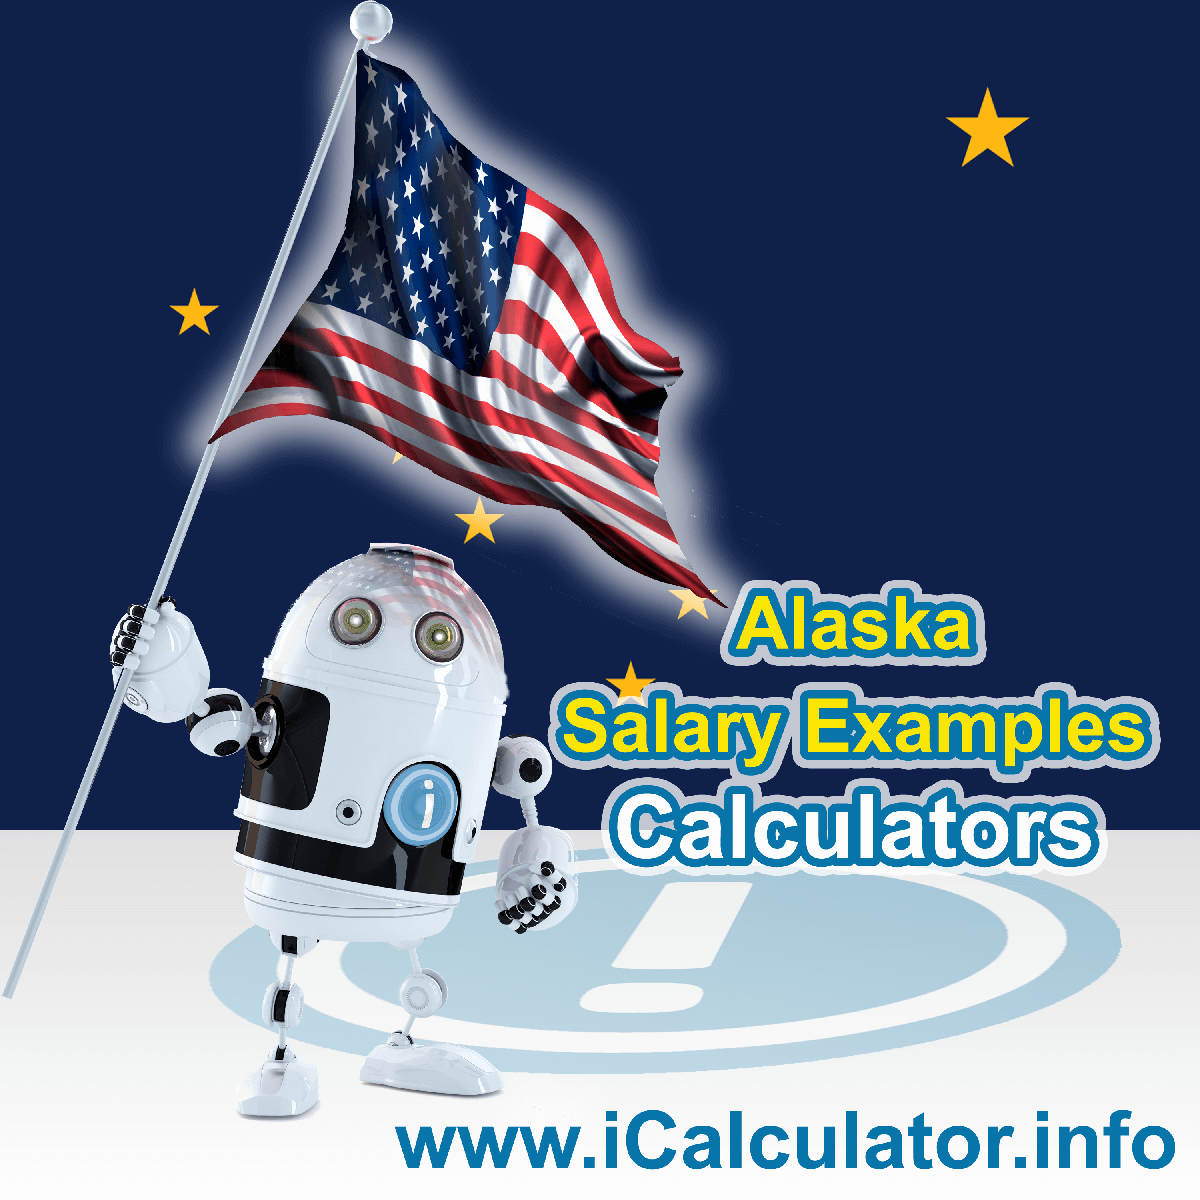 Alaska Salary Example for $ 190,000.00 in 2023 | iCalculator™ | $ 190,000.00 salary example for employee and employer paying Alaska State tincome taxes. Detailed salary after tax calculation including Alaska State Tax, Federal State Tax, Medicare Deductions, Social Security, Capital Gains and other income tax and salary deductions complete with supporting Alaska state tax tables 